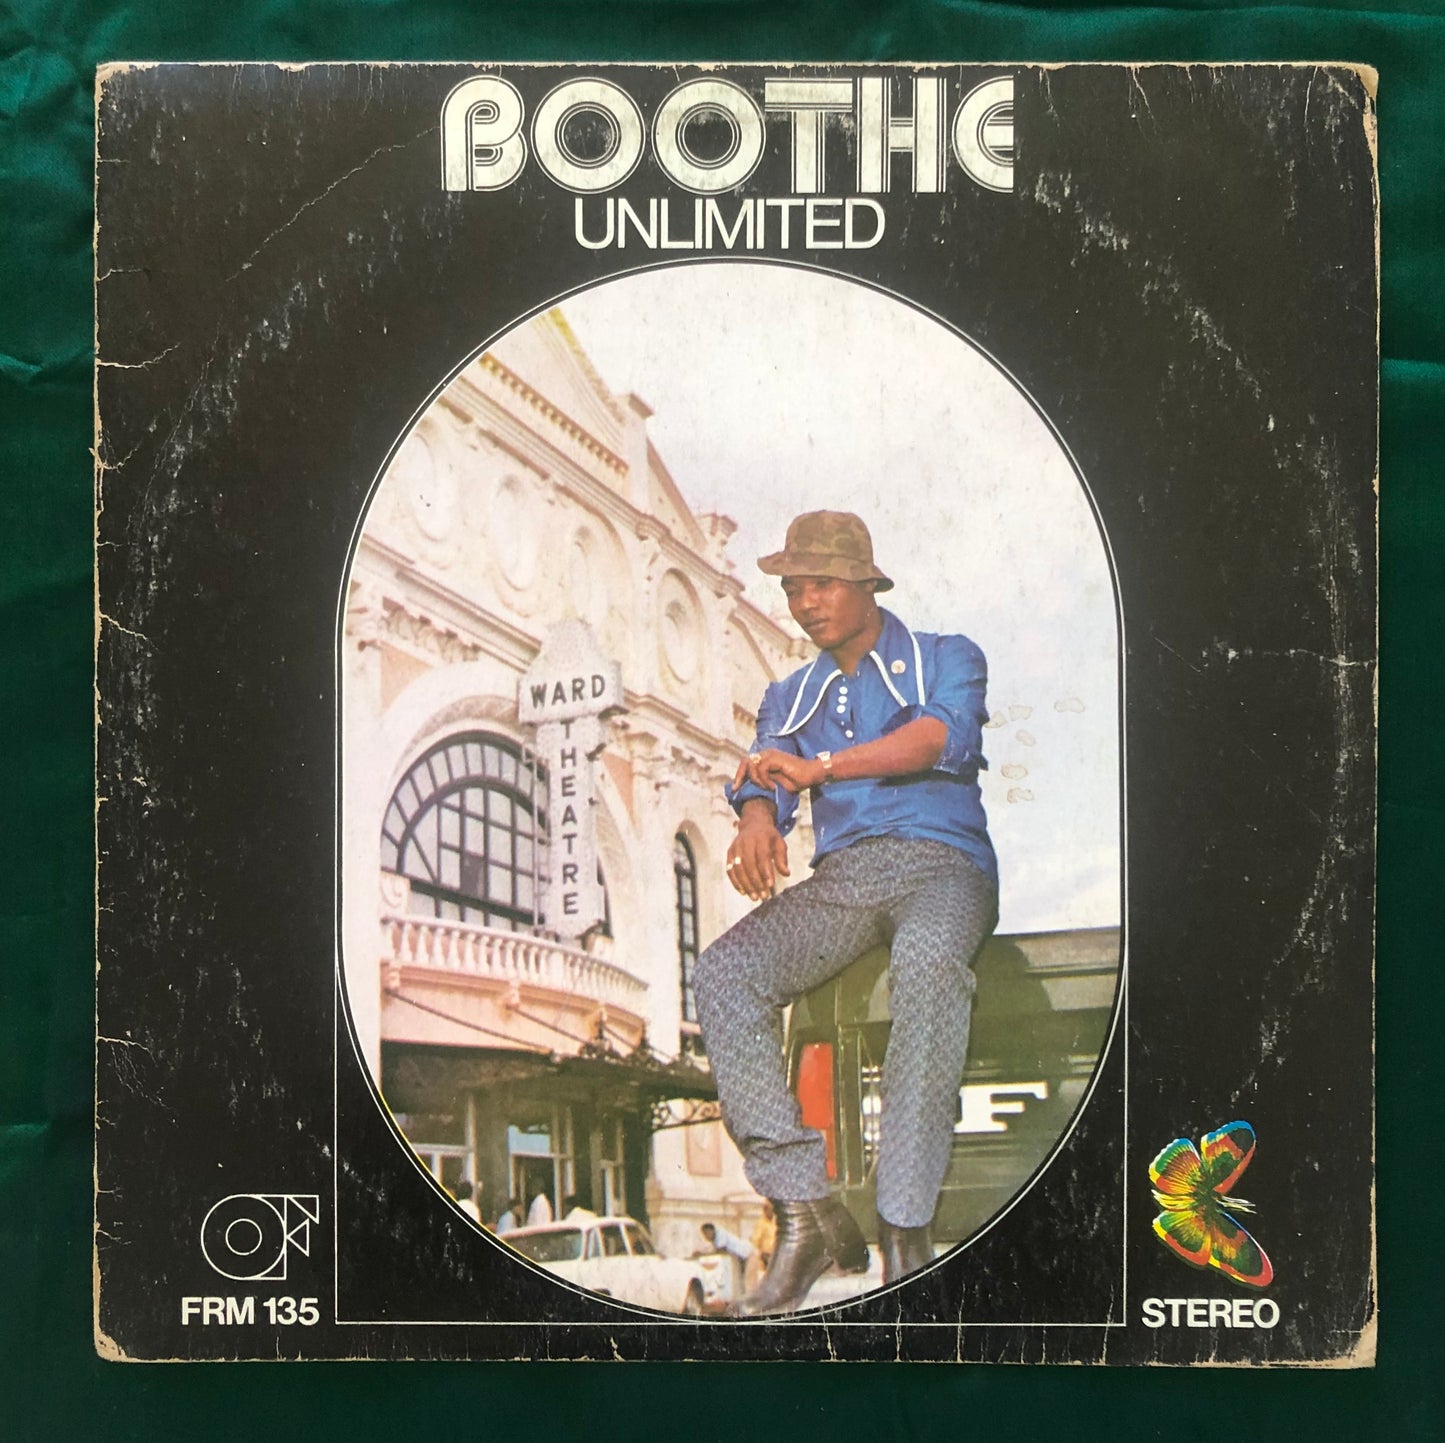 Ken Boothe - Boothe Unlimited 1972 Jamaican Press Federal Records Reggae